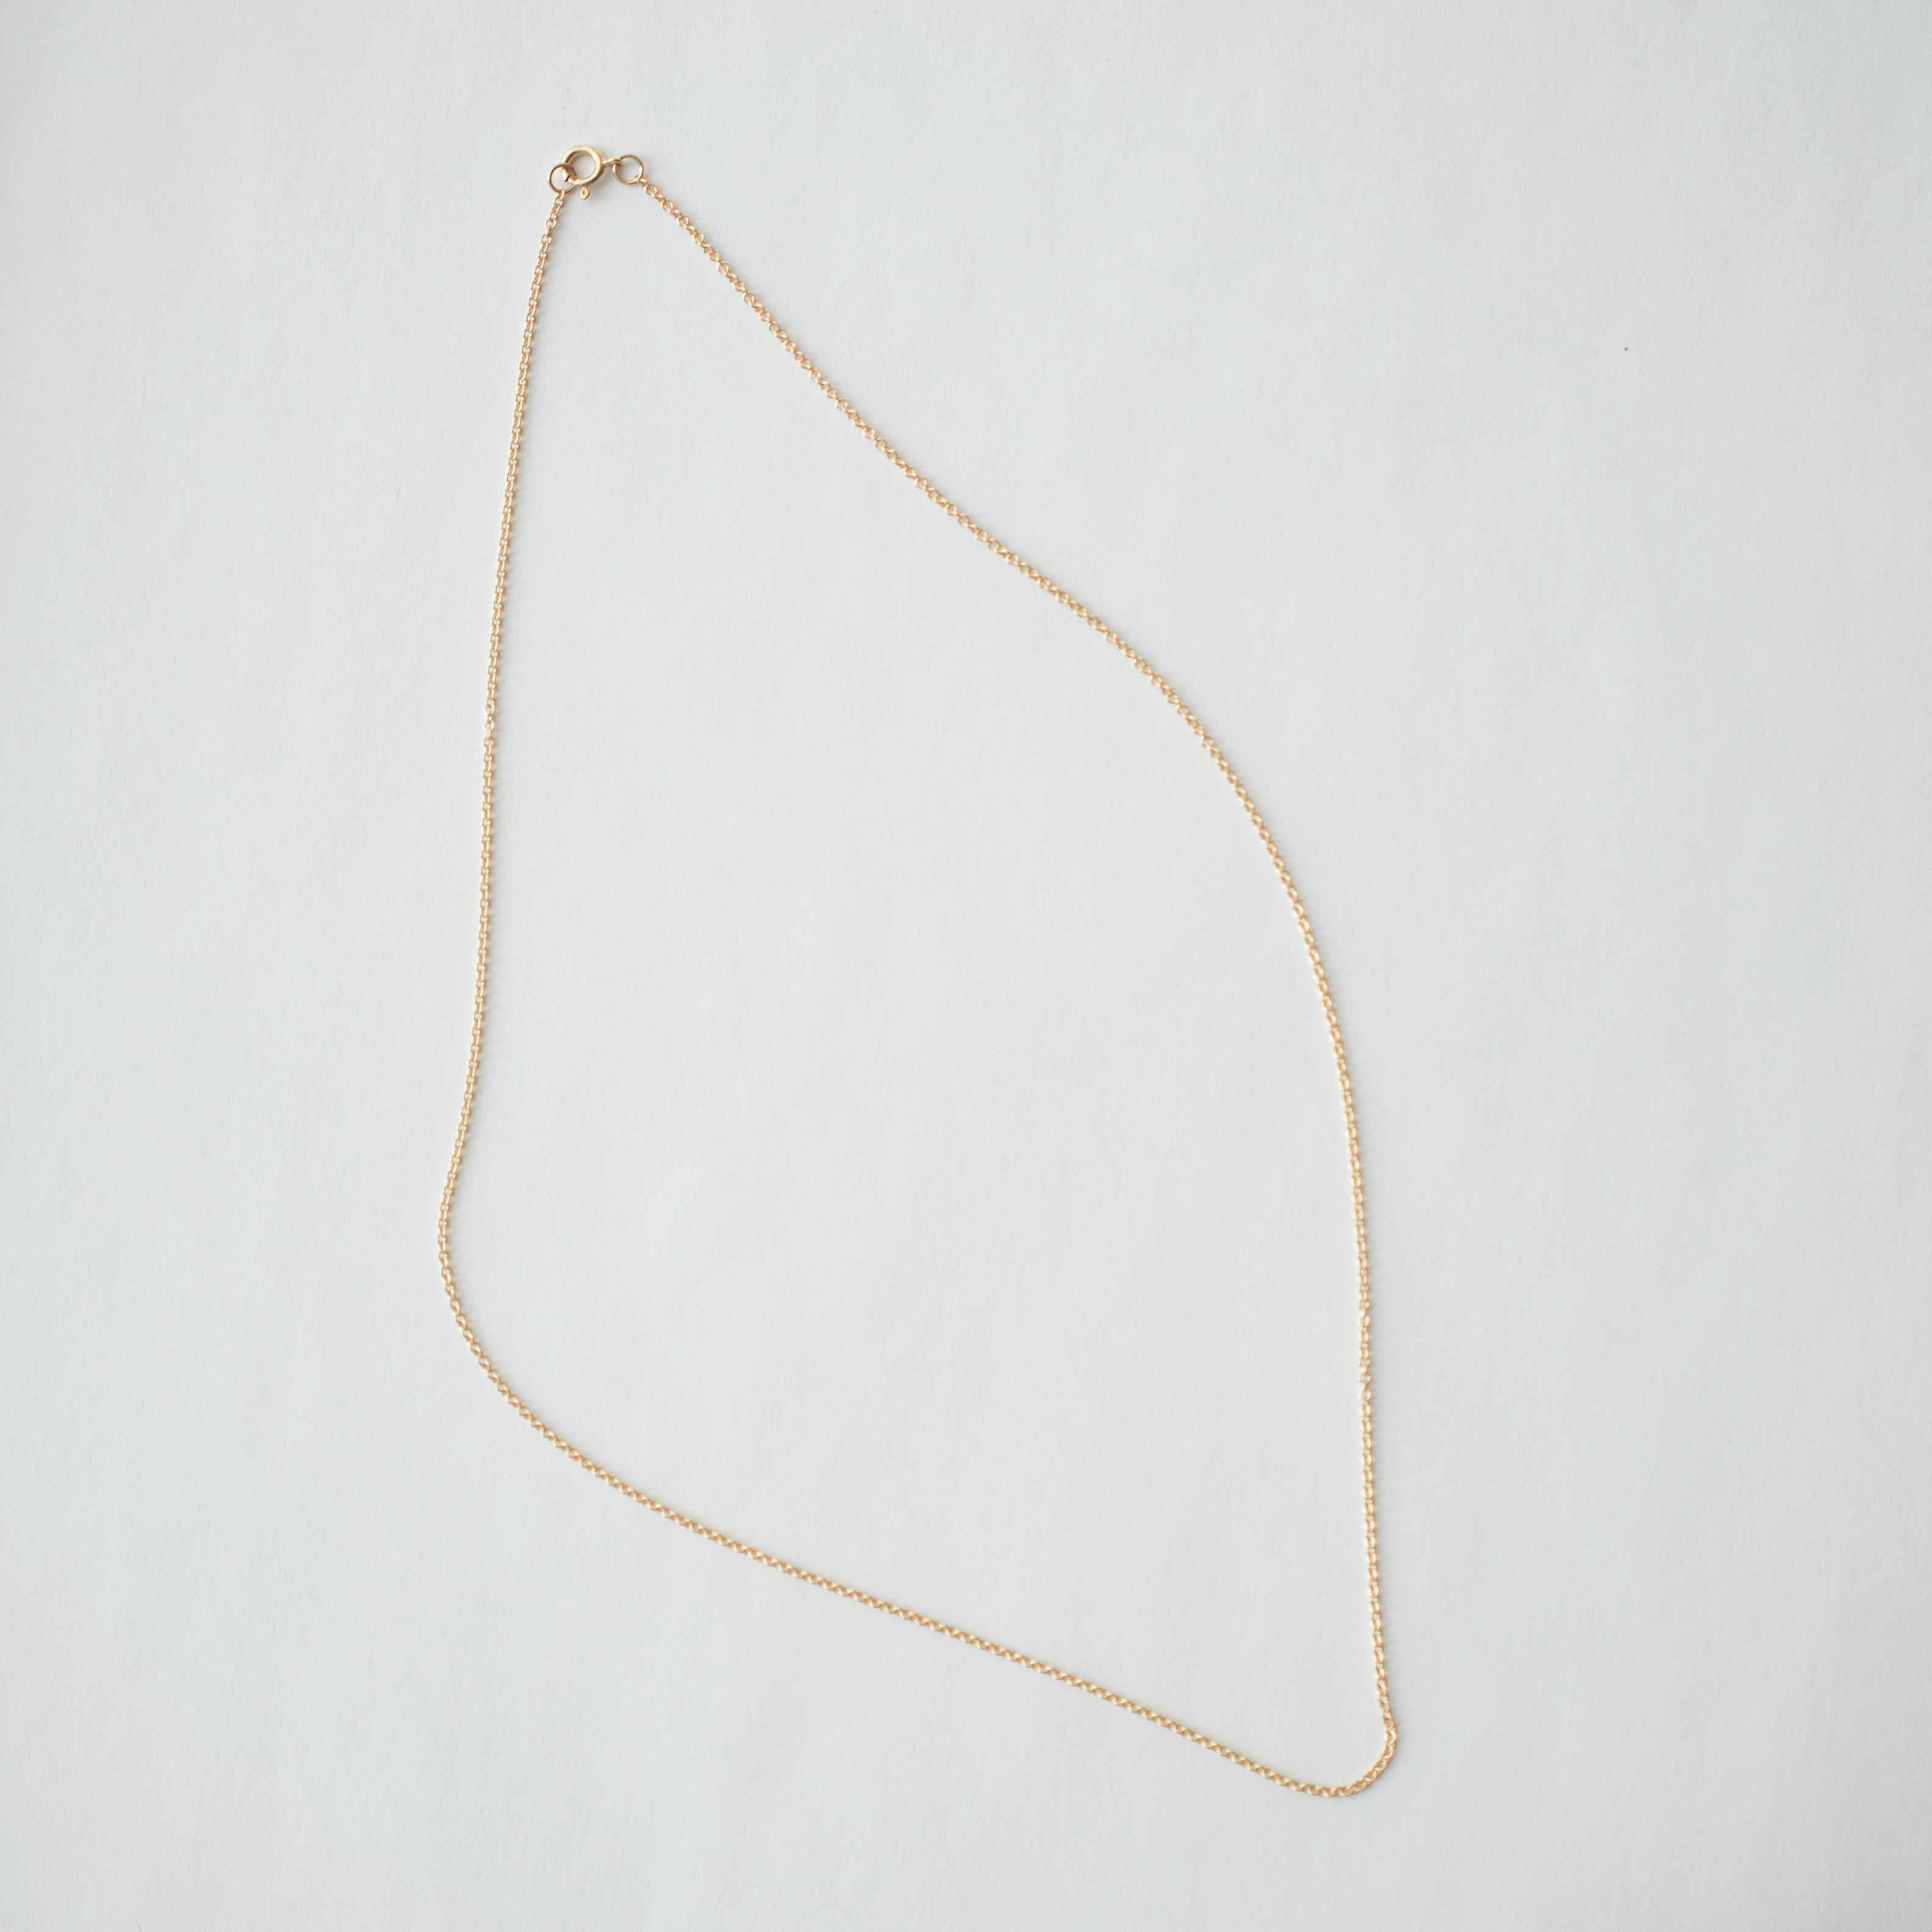 Designer Gold Chain in 14k Yellow Gold by SHW Fine Jewelry in NYC